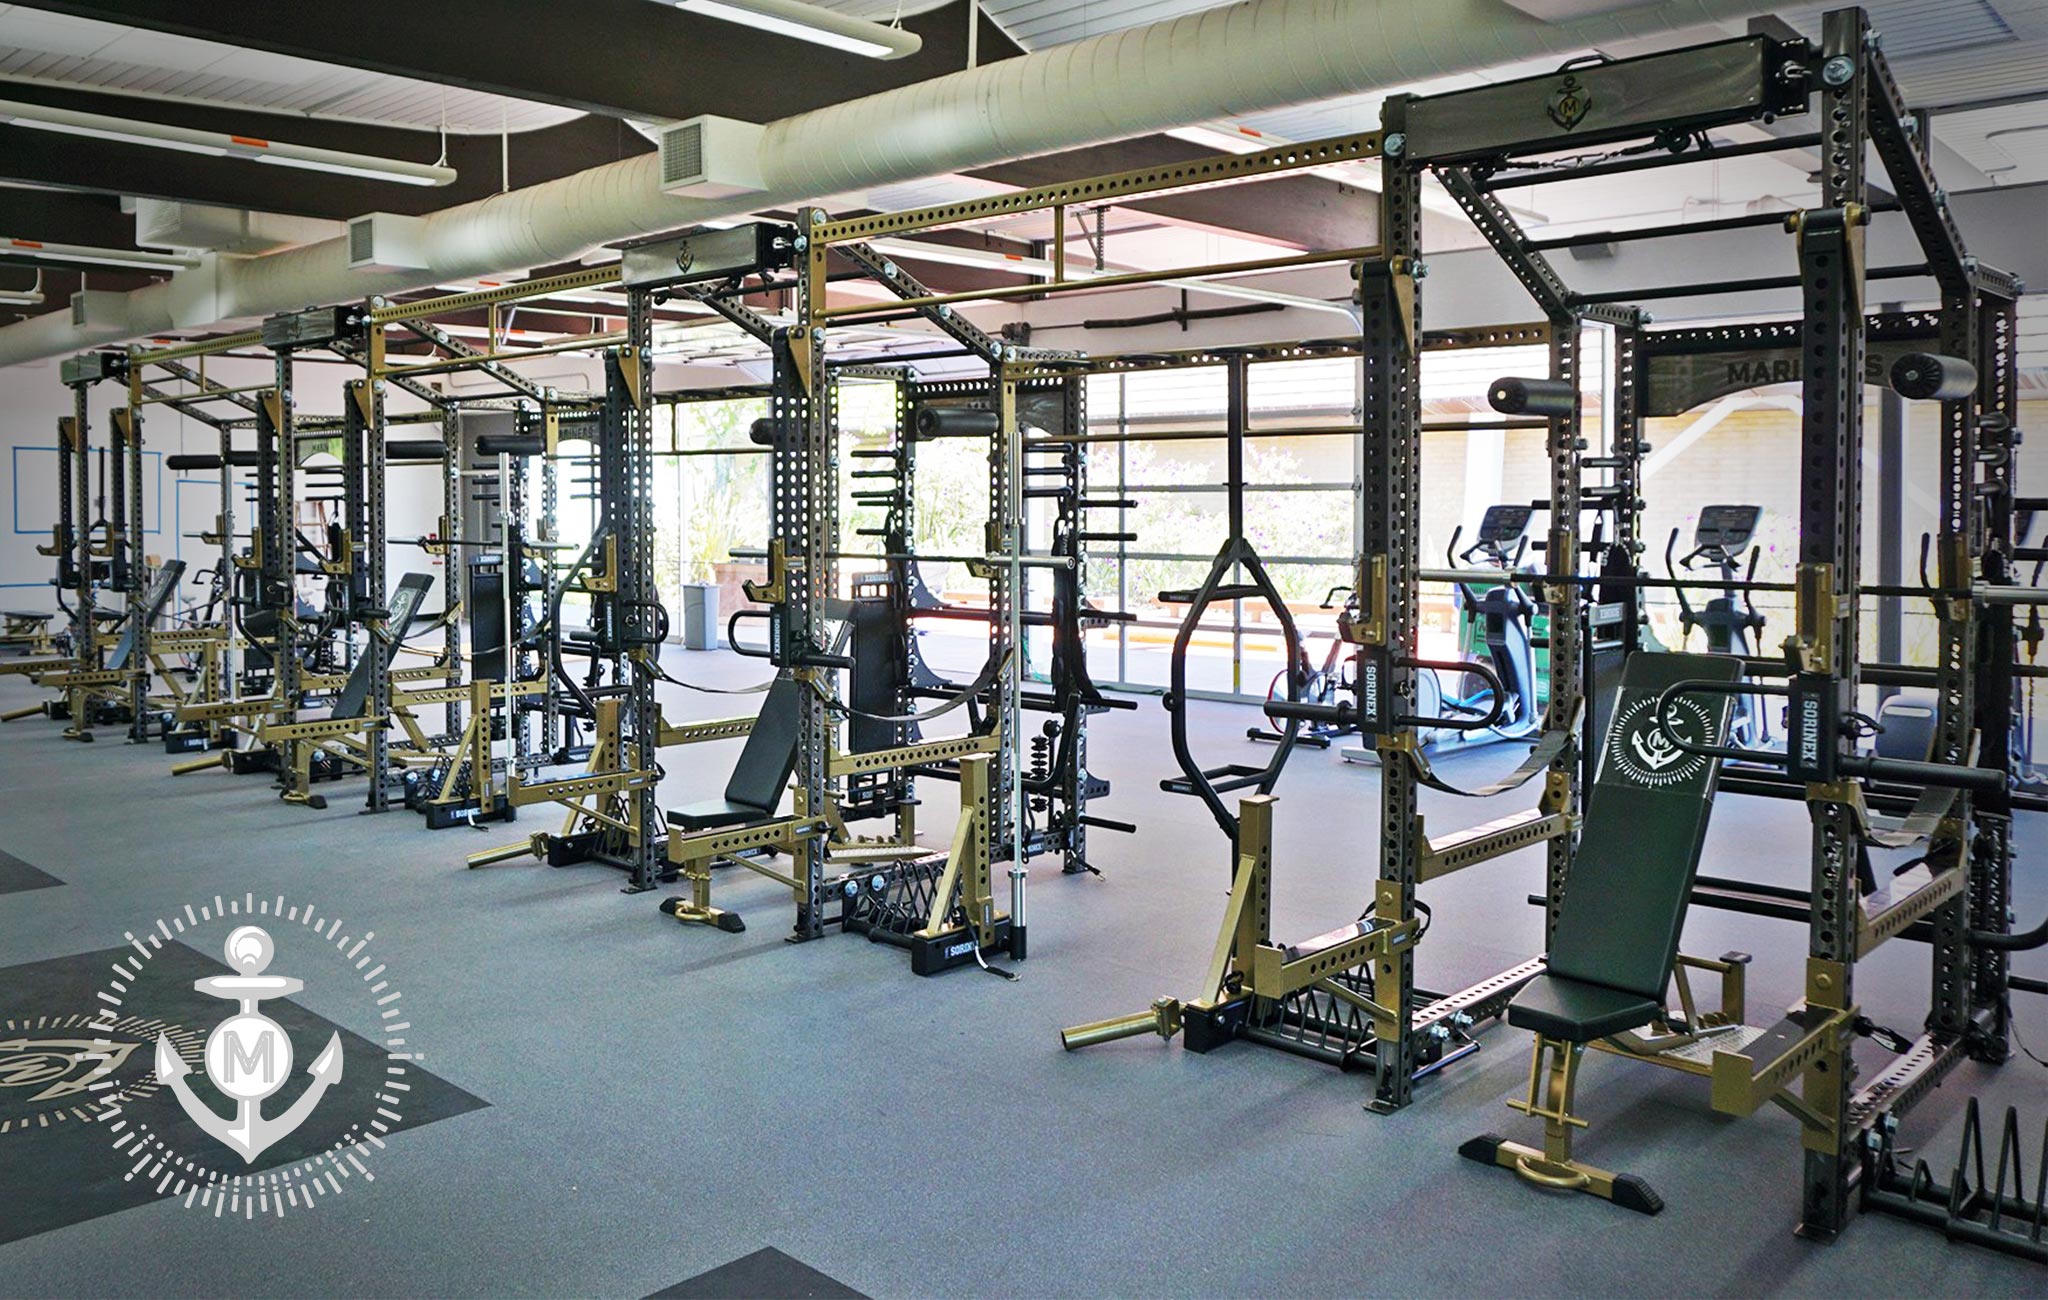 College of Marin Sorinex strength and conditioning facility